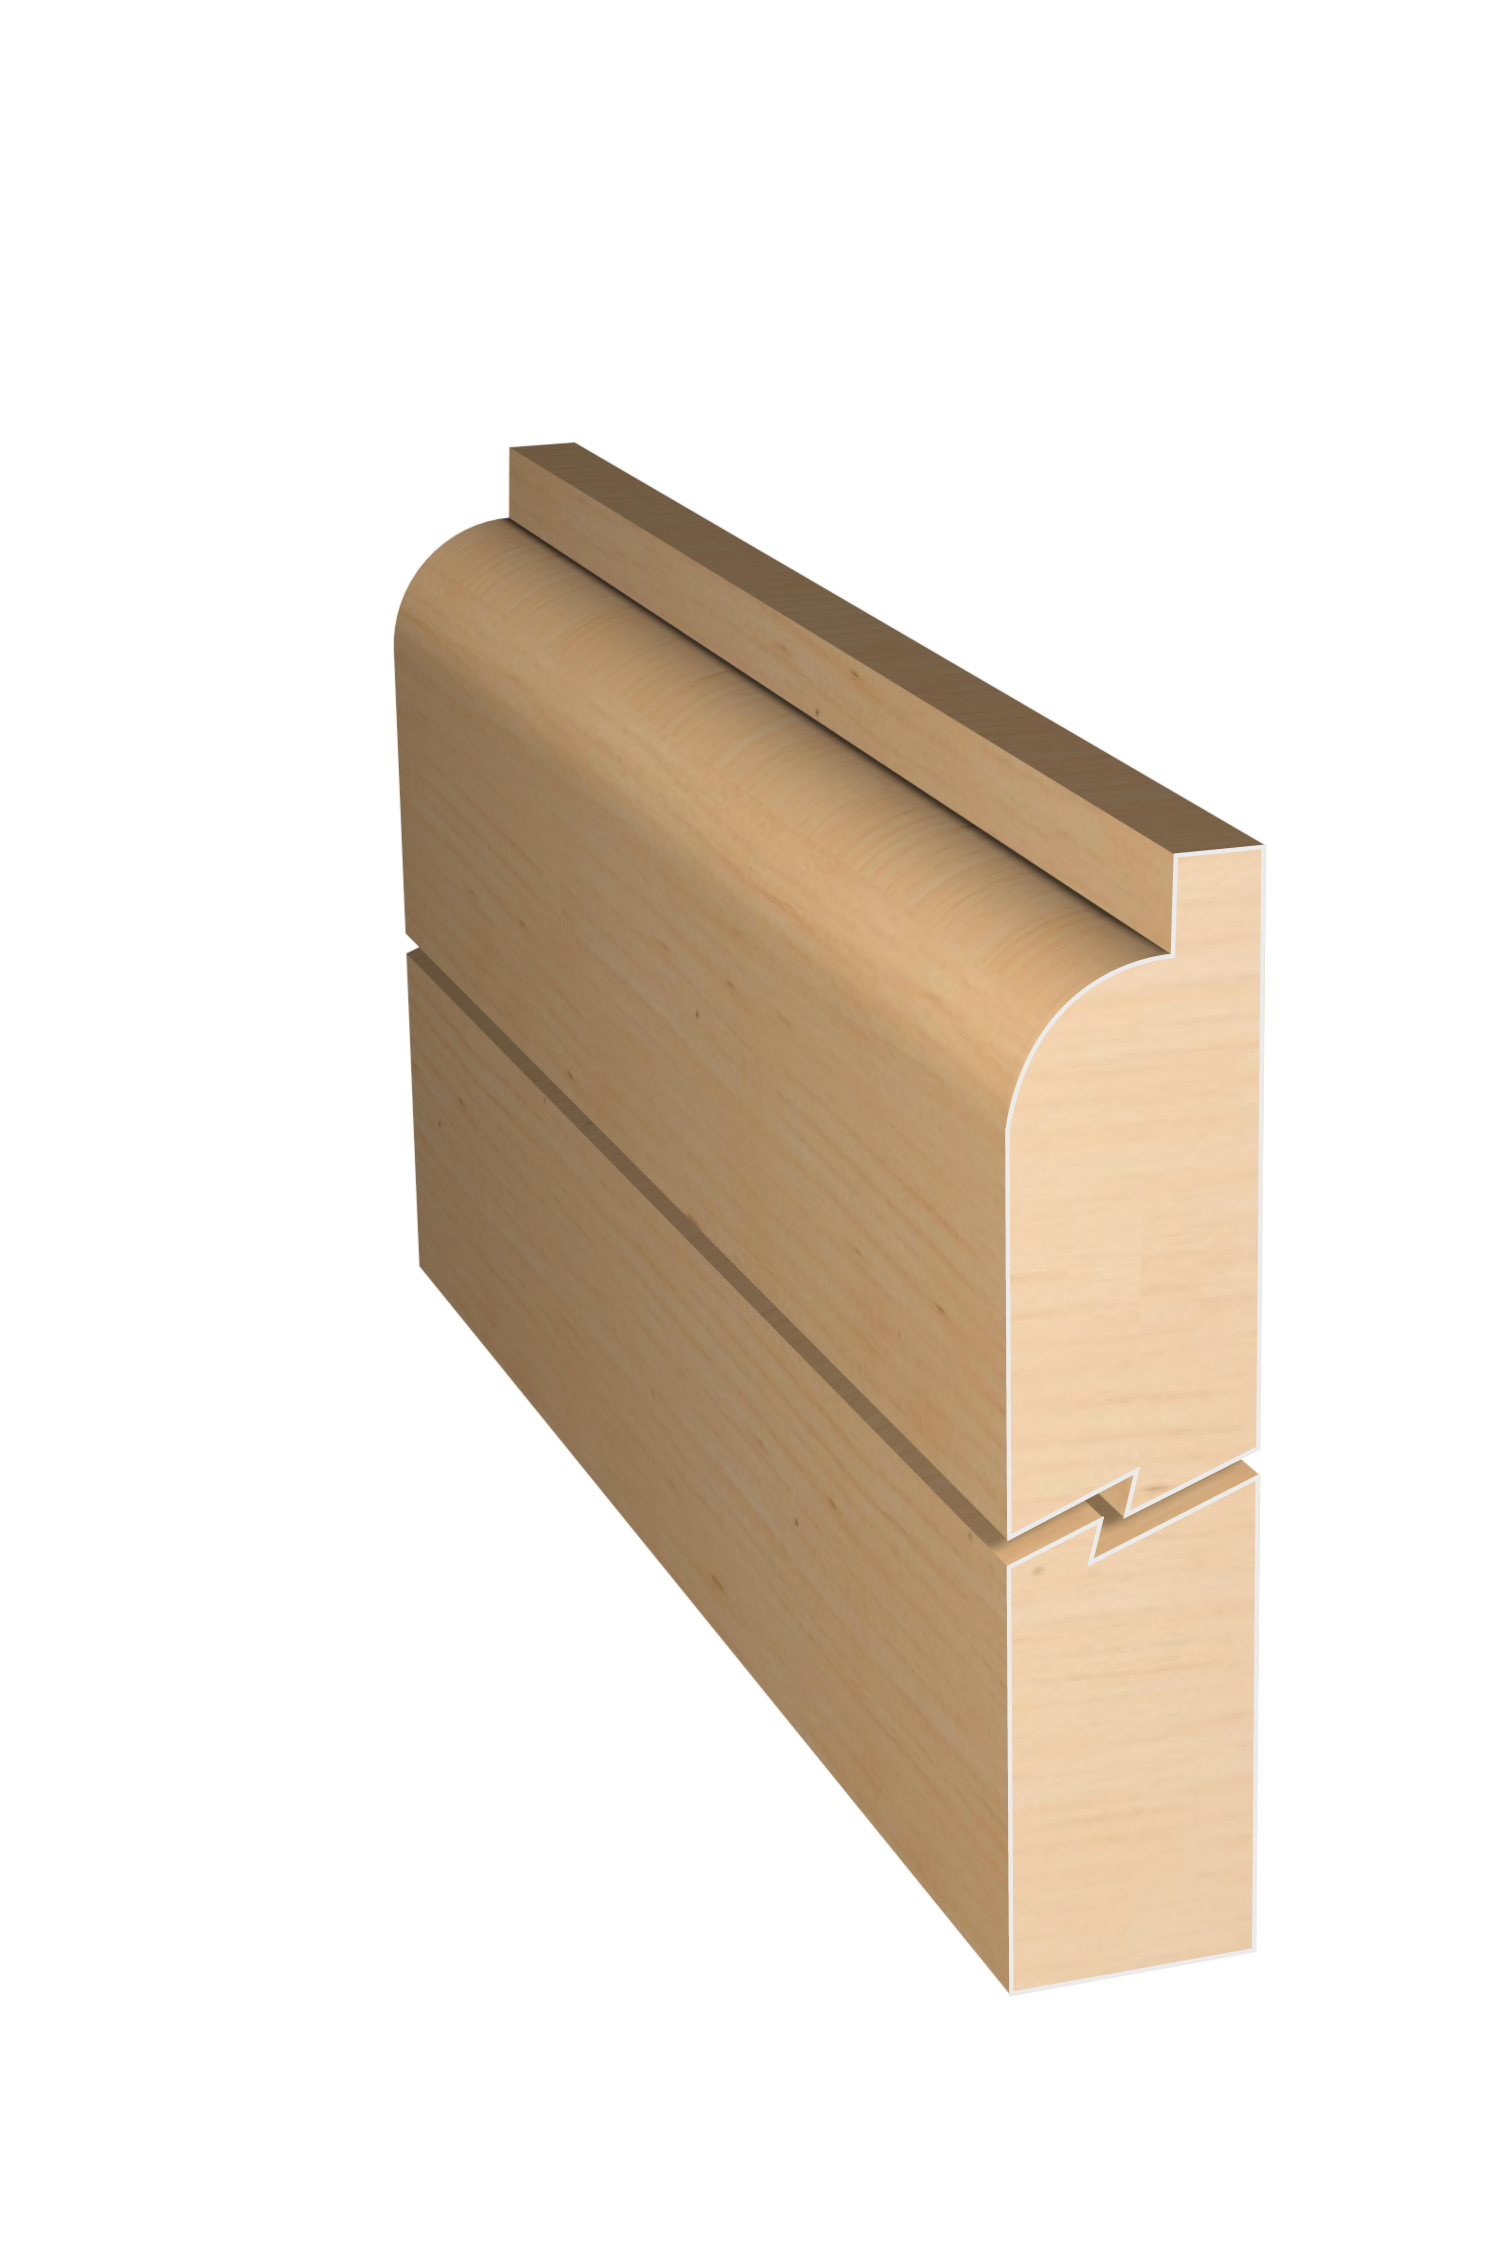 Three dimensional rendering of custom edge profile wood molding SKPL15 made by Public Lumber Company in Detroit.